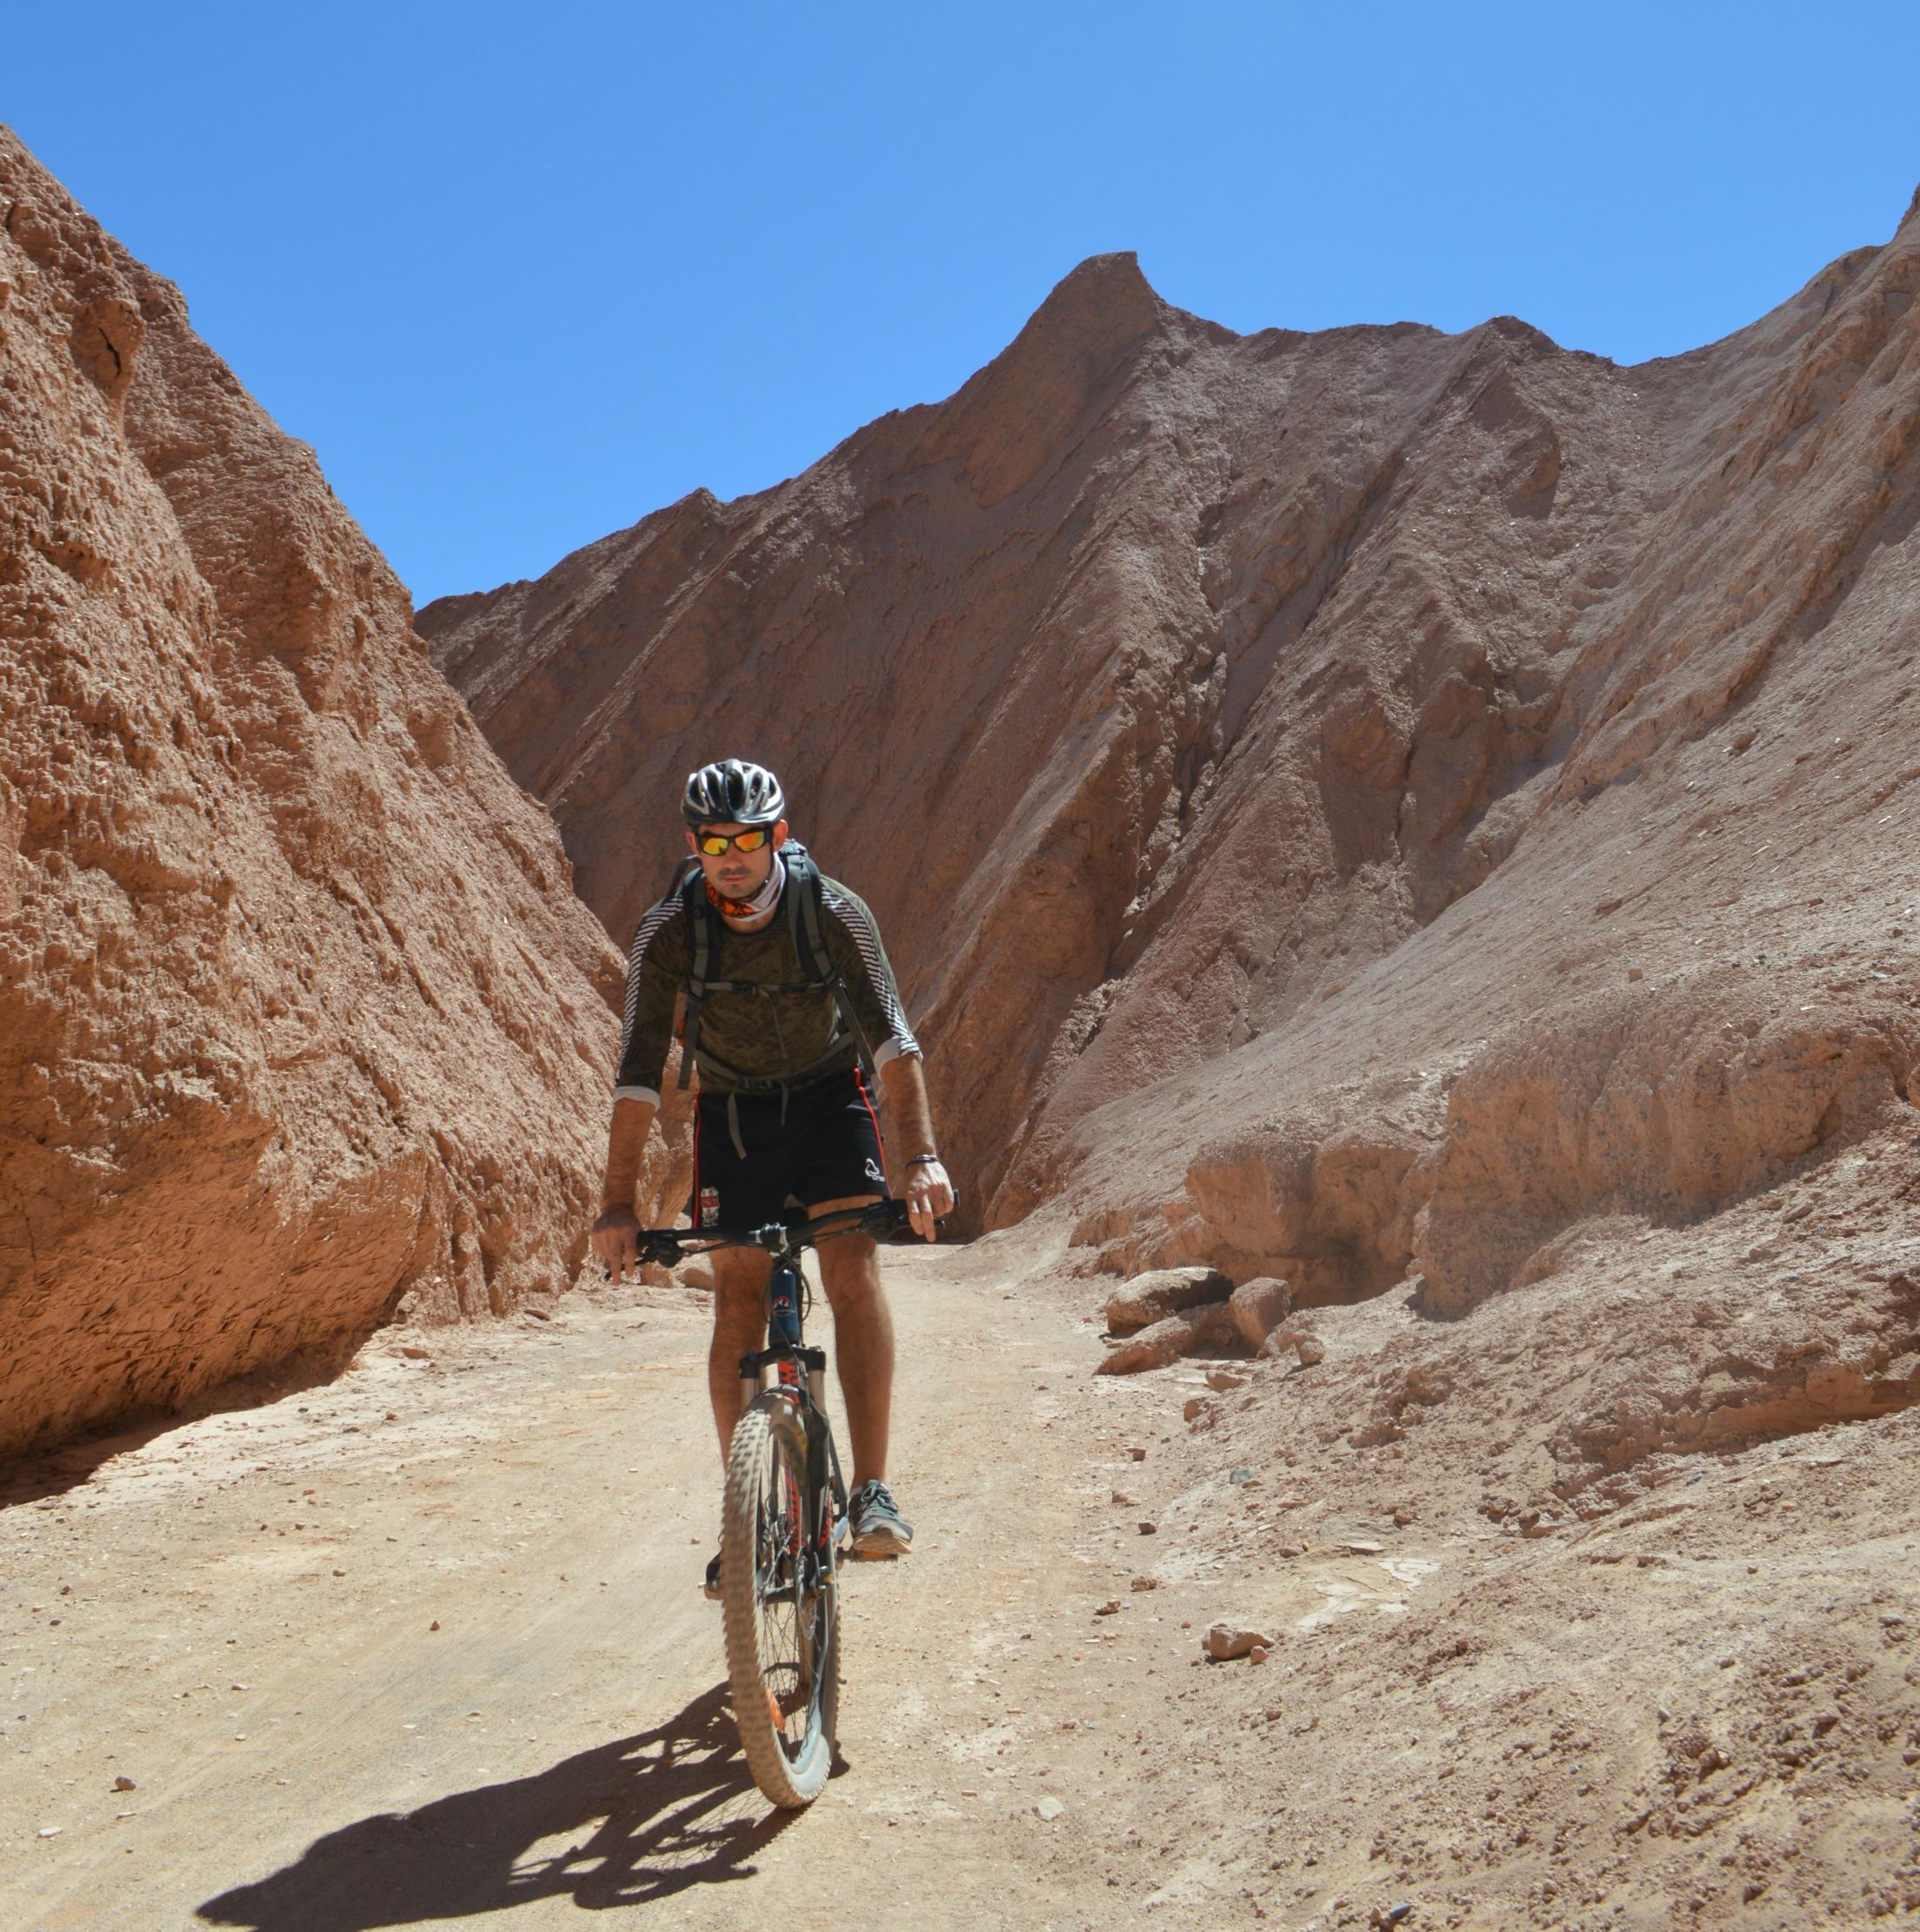 Mountainbiking under a clear blue sky in Devil's Canyon